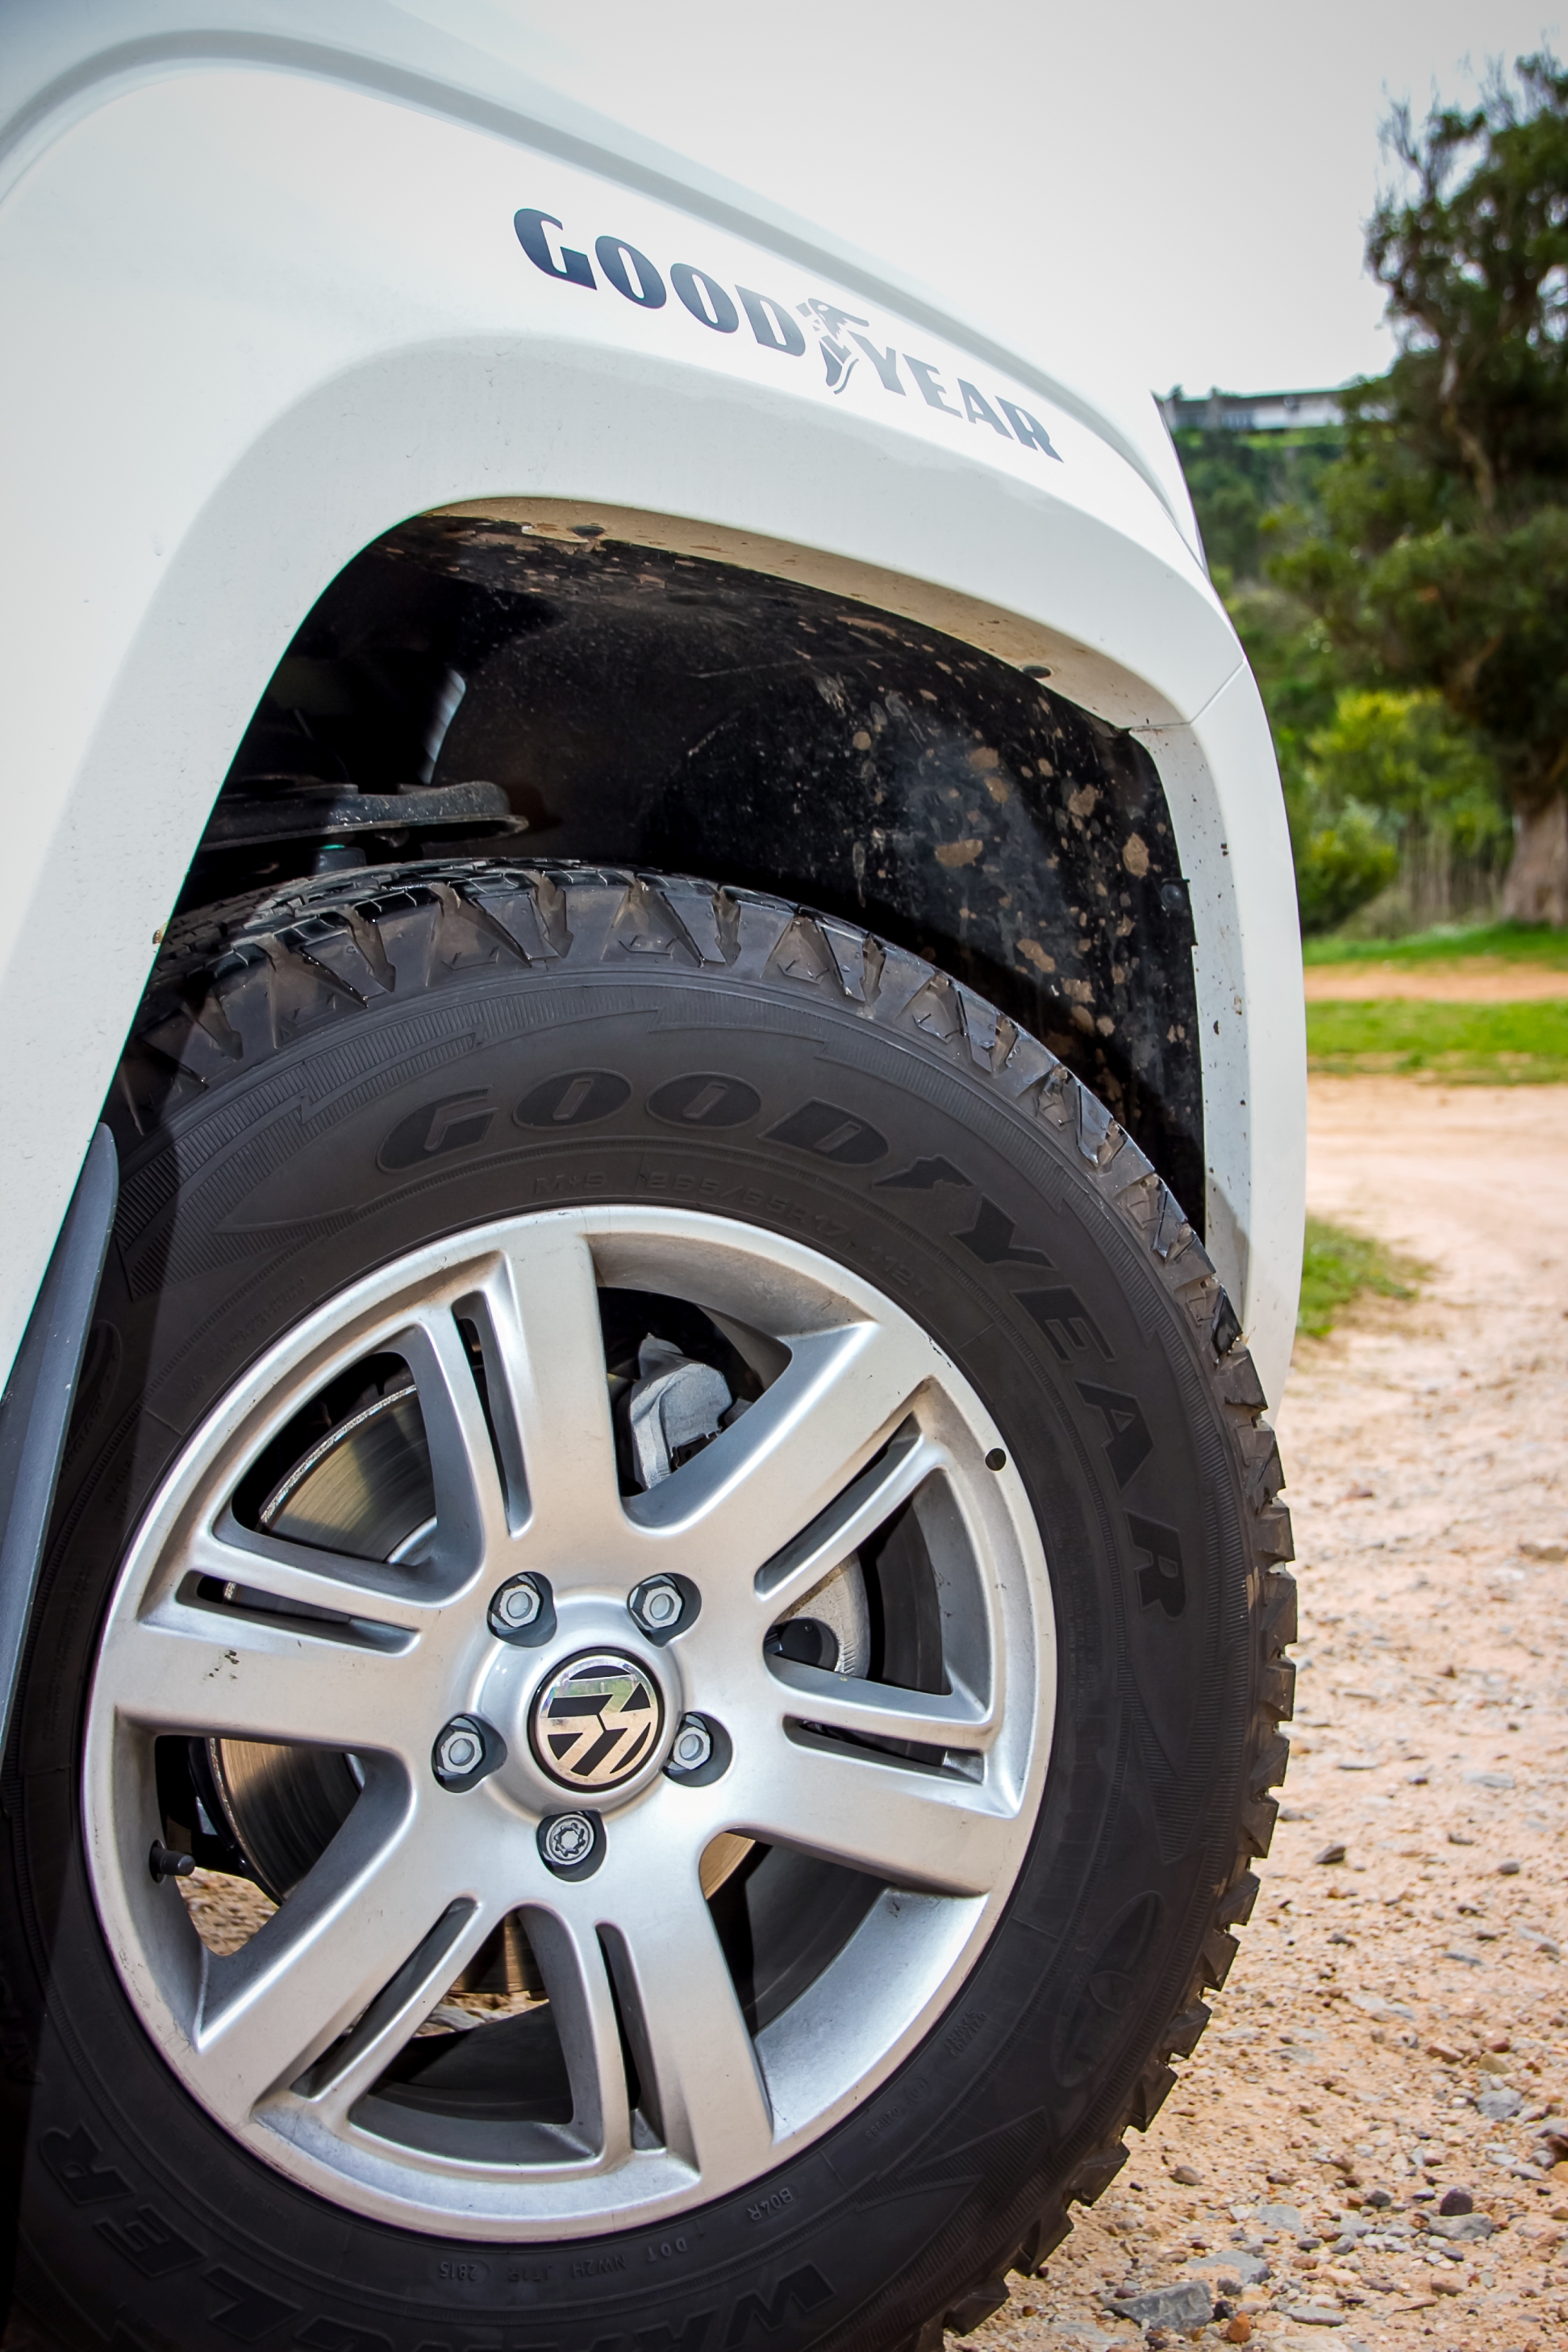 Goodyear Wranglers fitted to anti-poaching vehicles - Tyrepress